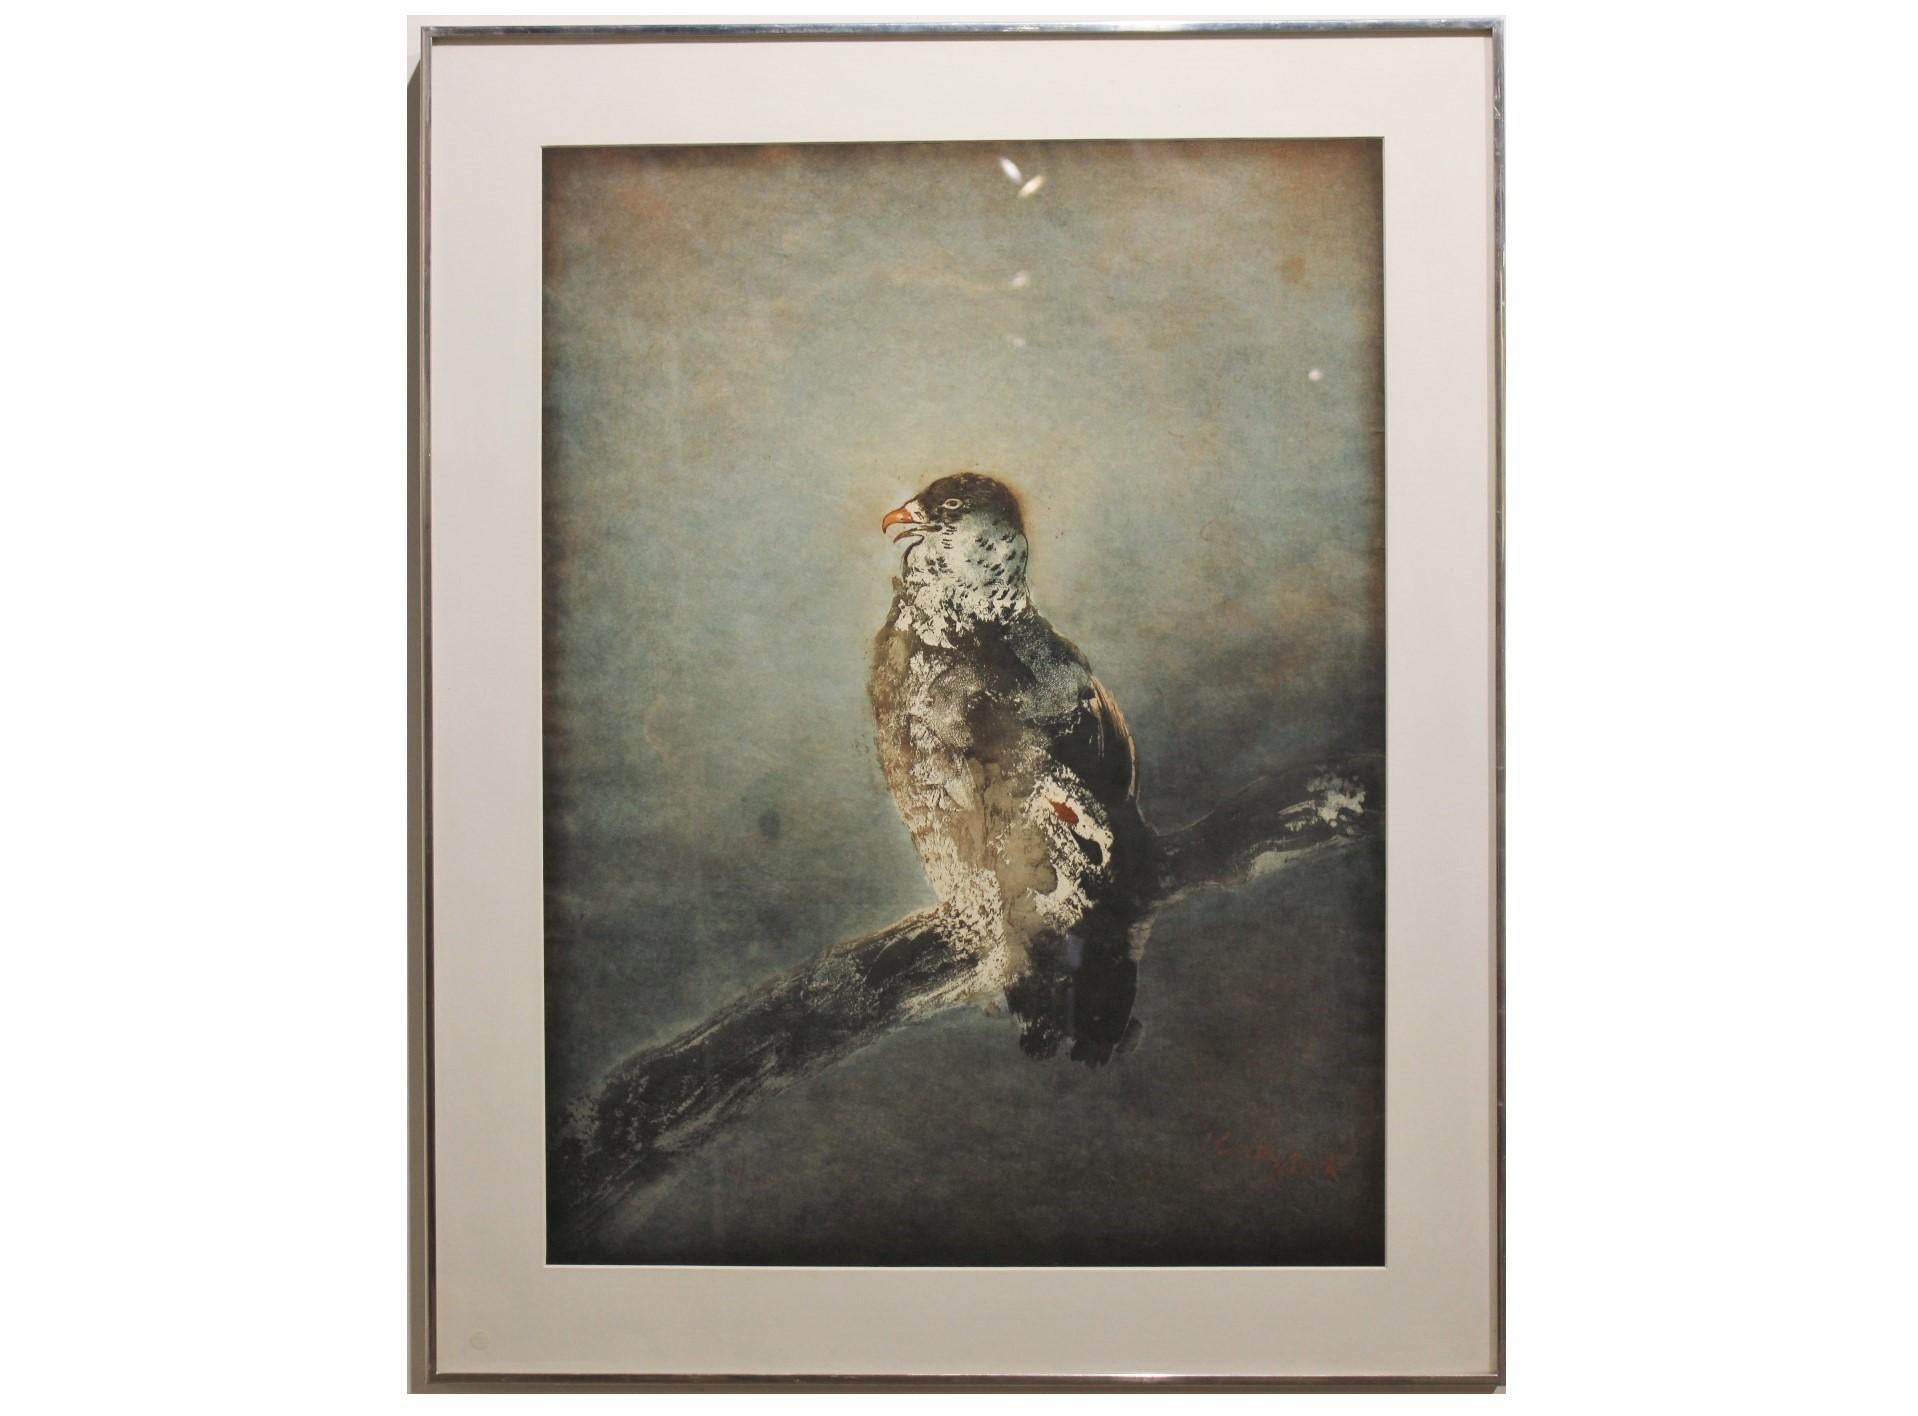 Kaiko Moti Abstract Drawing - "Falcon on Branch" Grey Tonal Painting of a Falcon Perched on a Branch